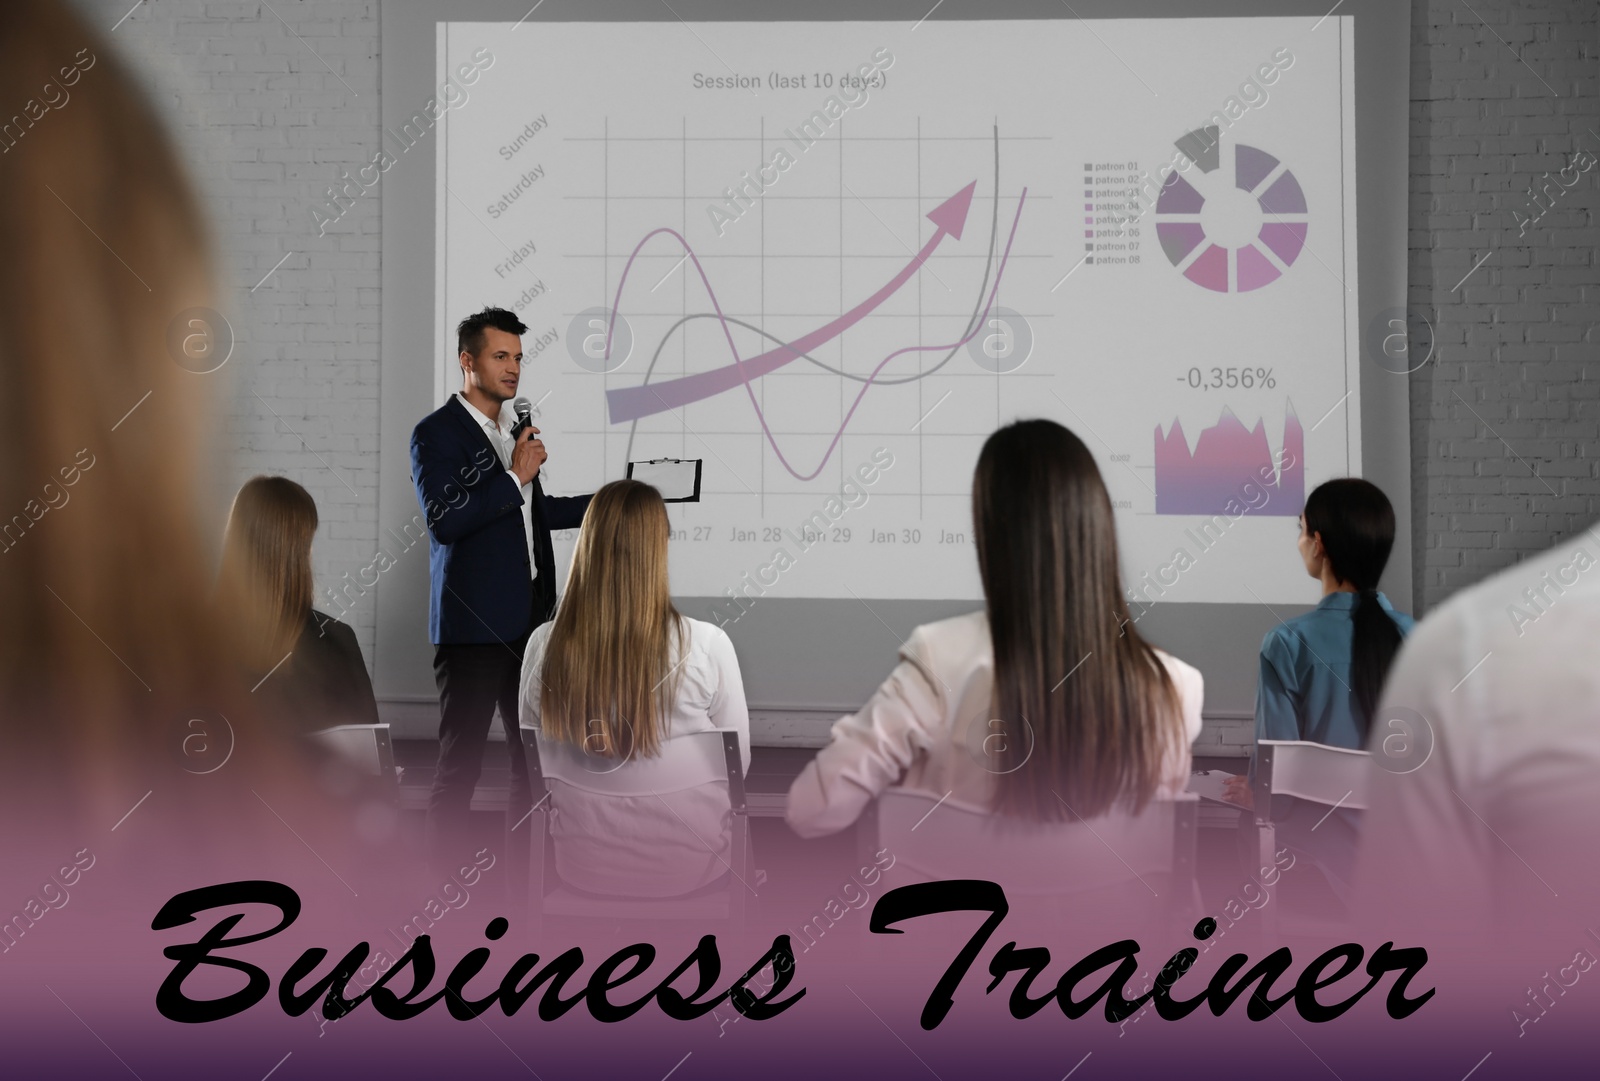 Image of Professional business trainer giving lecture in conference room with projection screen